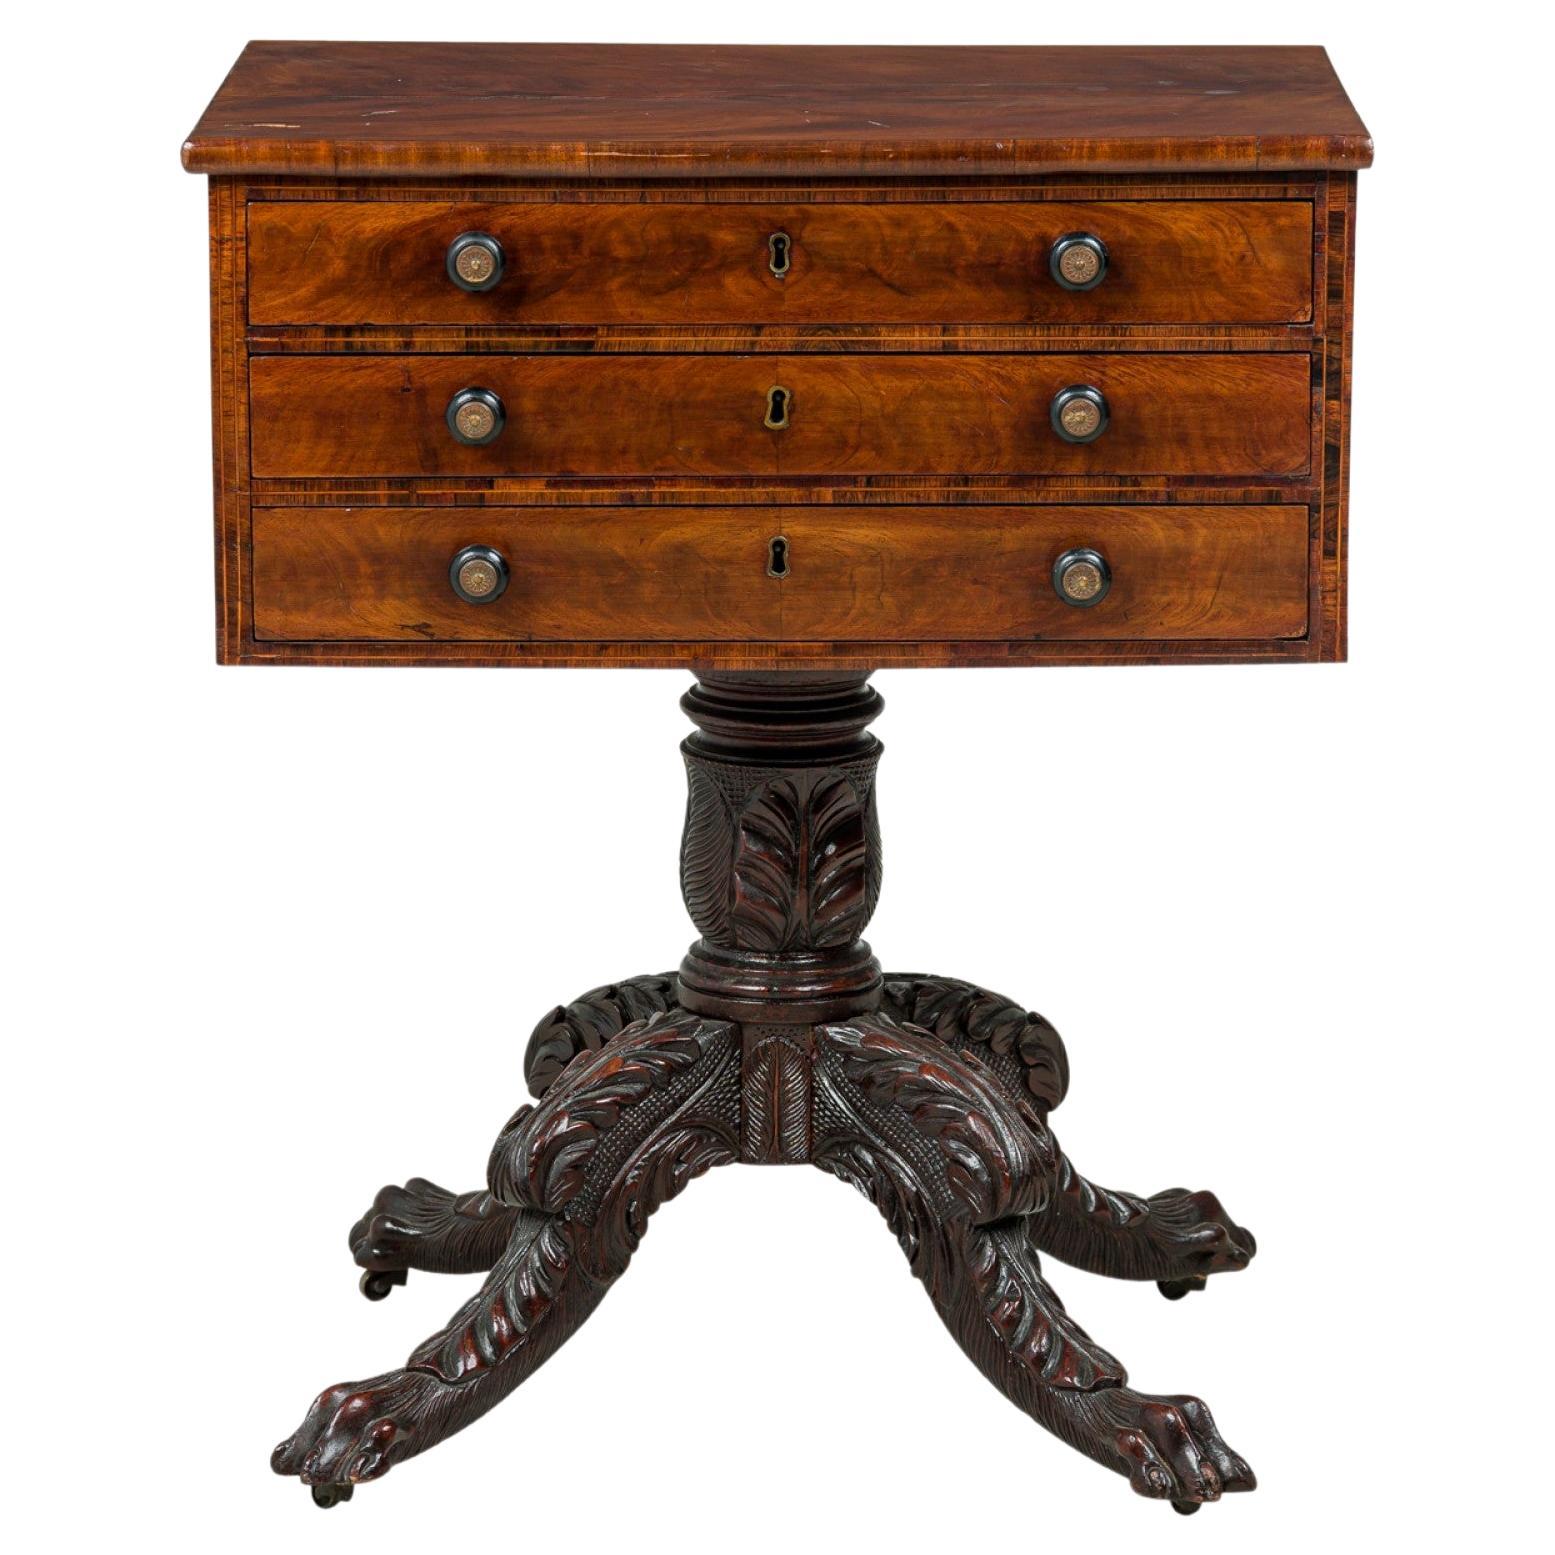 American Empire mahogany Side Table by Duncan Phyfe